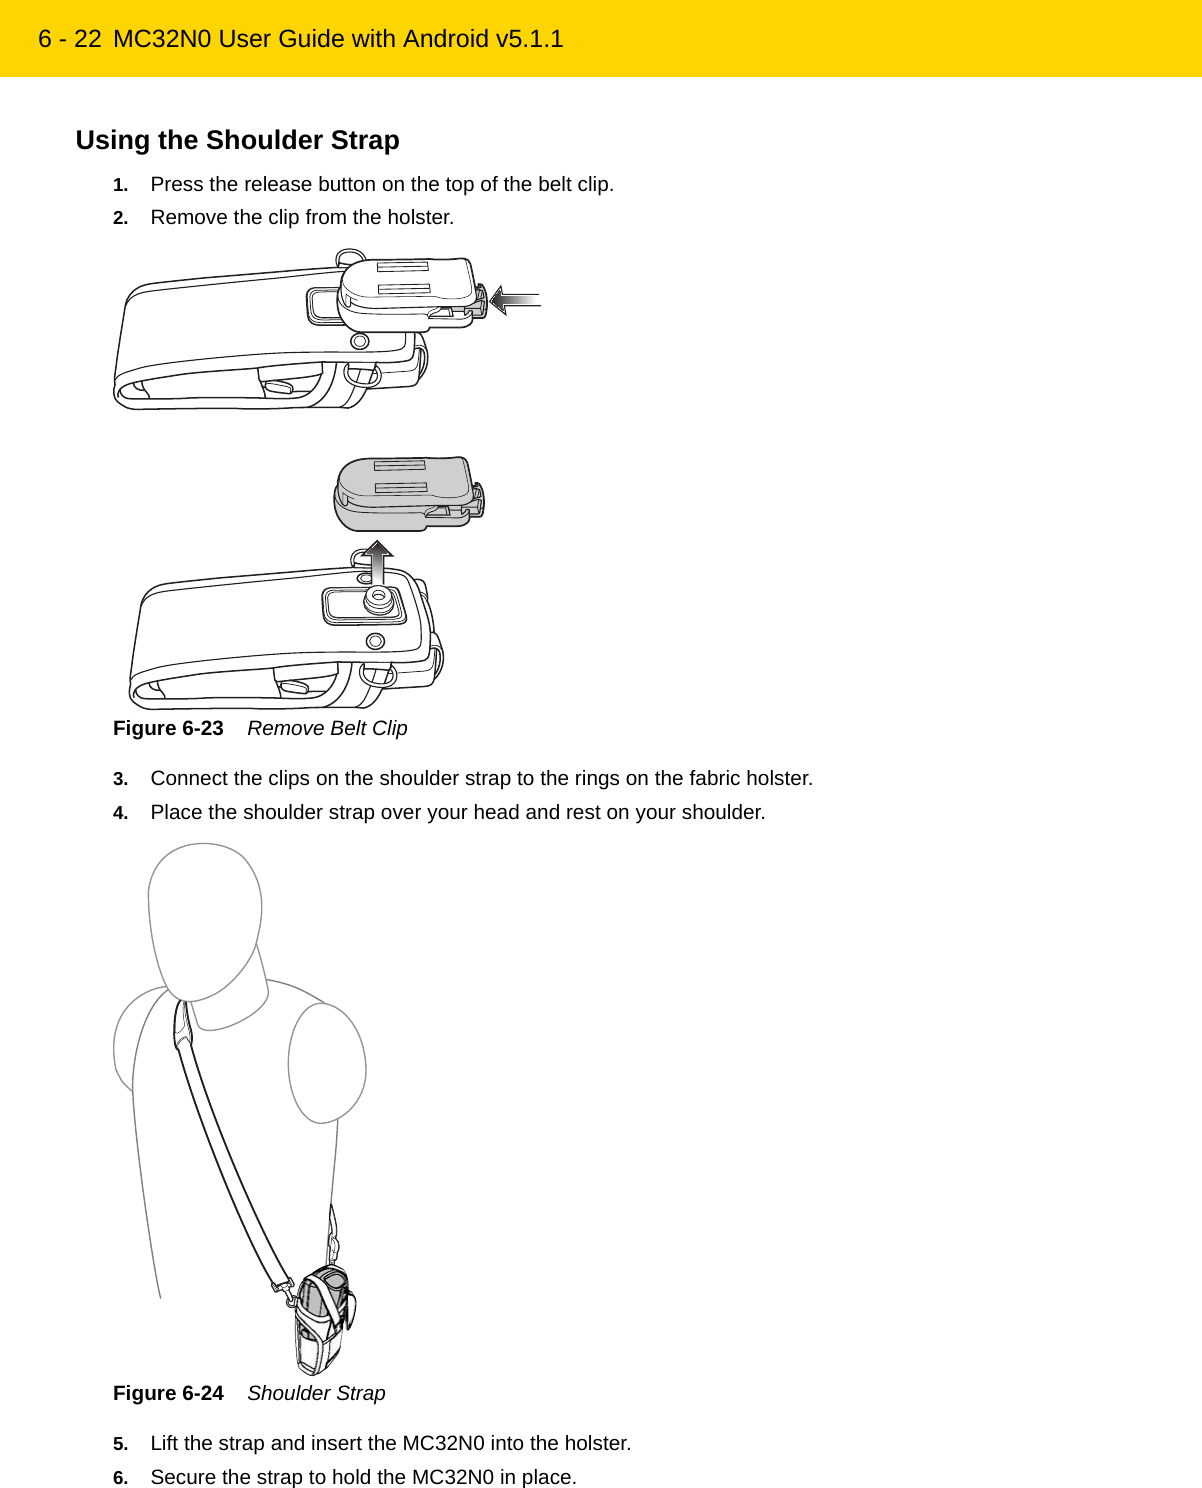 6 - 22 MC32N0 User Guide with Android v5.1.1Using the Shoulder Strap1. Press the release button on the top of the belt clip.2. Remove the clip from the holster.Figure 6-23    Remove Belt Clip3. Connect the clips on the shoulder strap to the rings on the fabric holster.4. Place the shoulder strap over your head and rest on your shoulder.Figure 6-24    Shoulder Strap5. Lift the strap and insert the MC32N0 into the holster.6. Secure the strap to hold the MC32N0 in place.REVIEW ONLY - REVIEW ONLY - REVIEW ONLY                             REVIEW ONLY - REVIEW ONLY - REVIEW ONLY